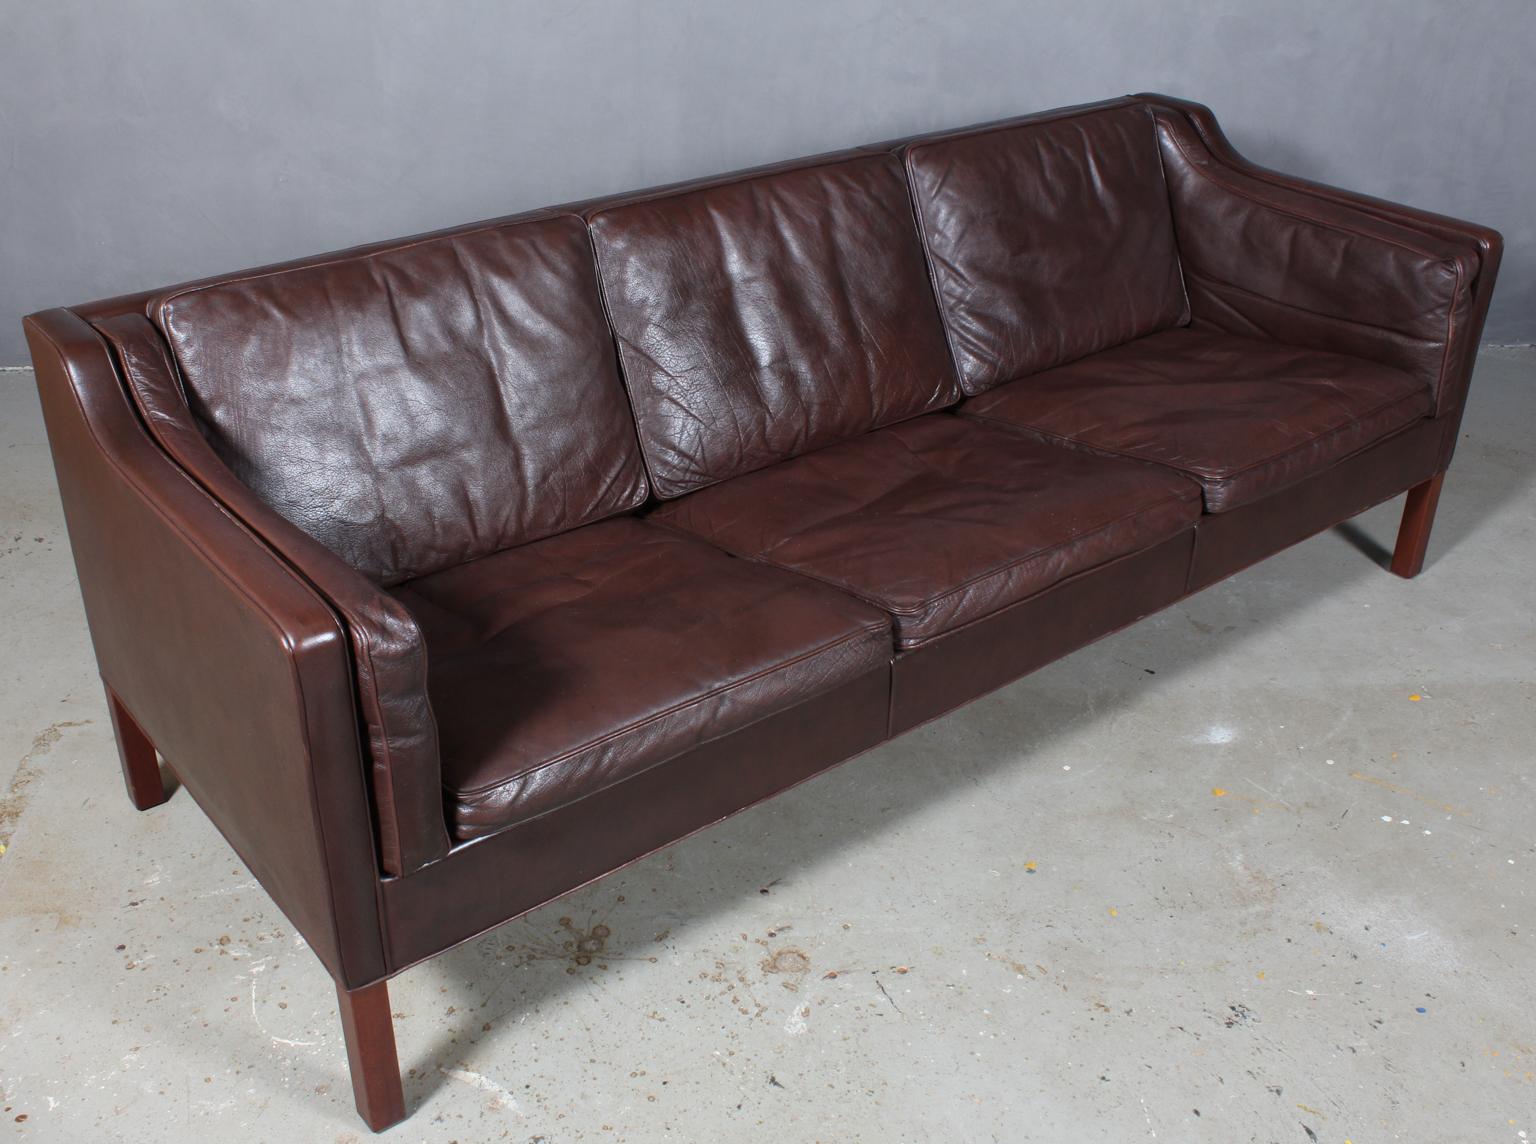 Børge Mogensen three-seat sofa with original tan leather upholstery.

Legs of teak.

Model 2213, made by Fredericia Furniture.